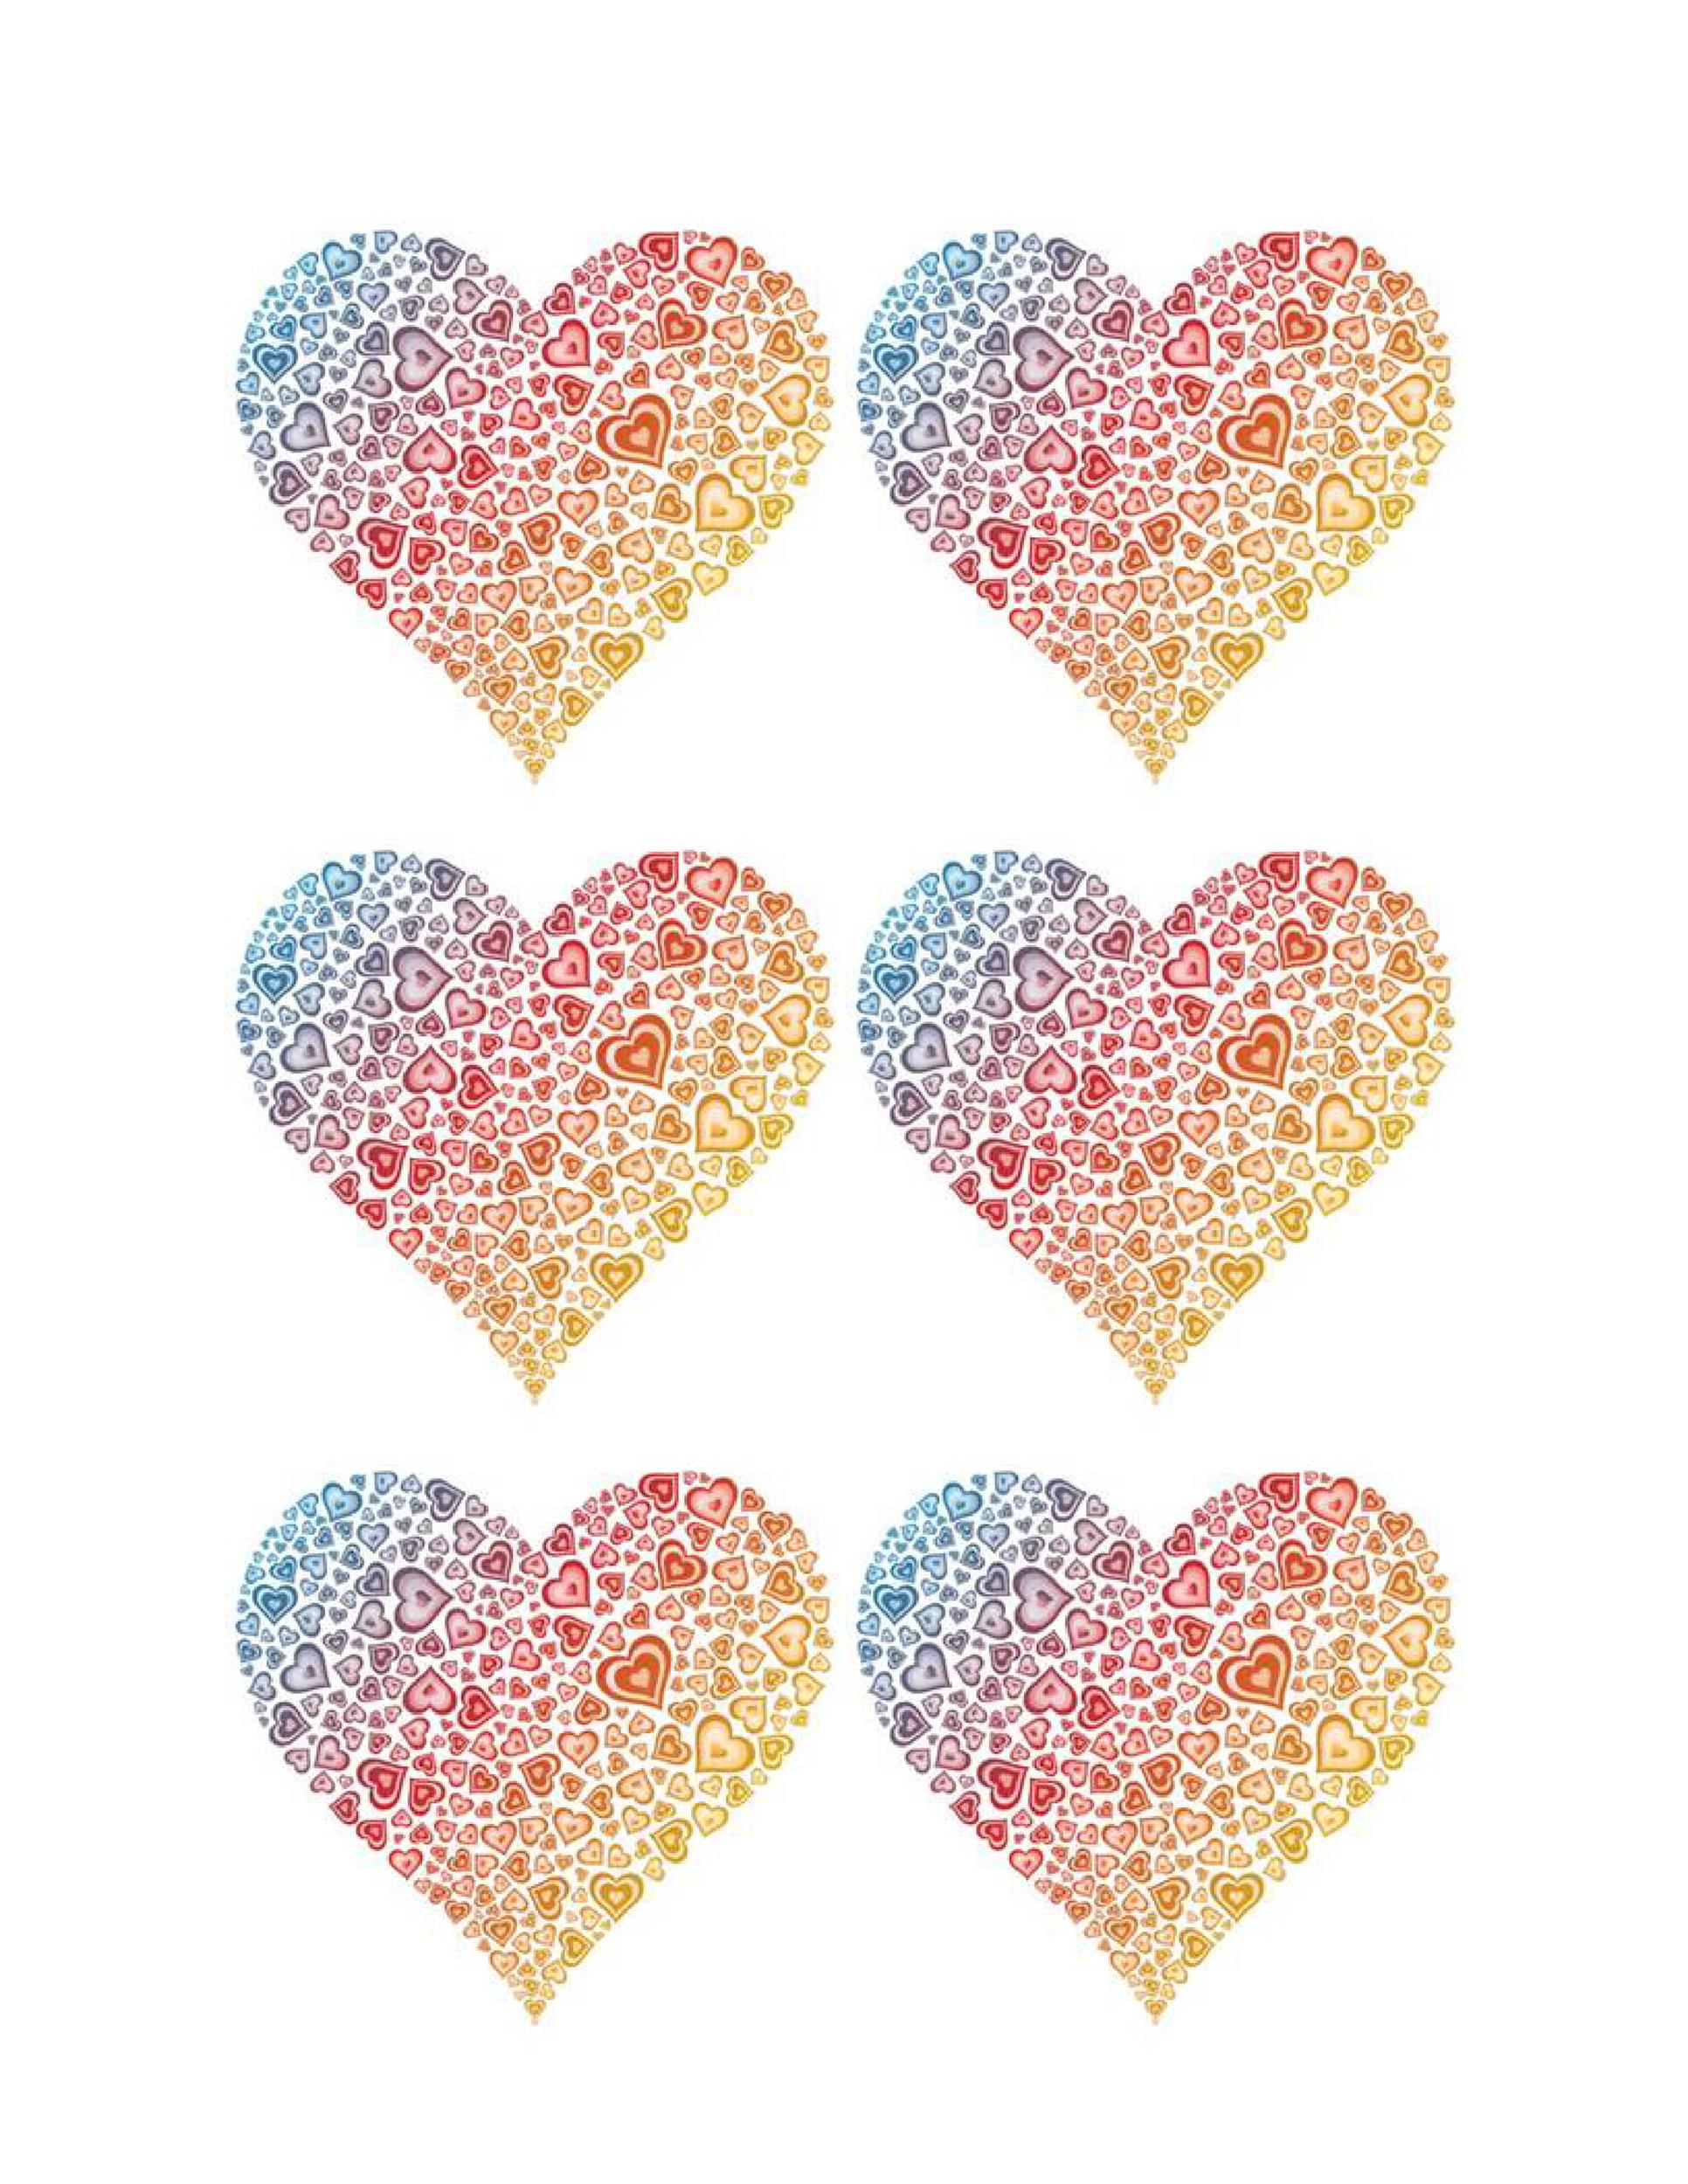 printable hearts colored